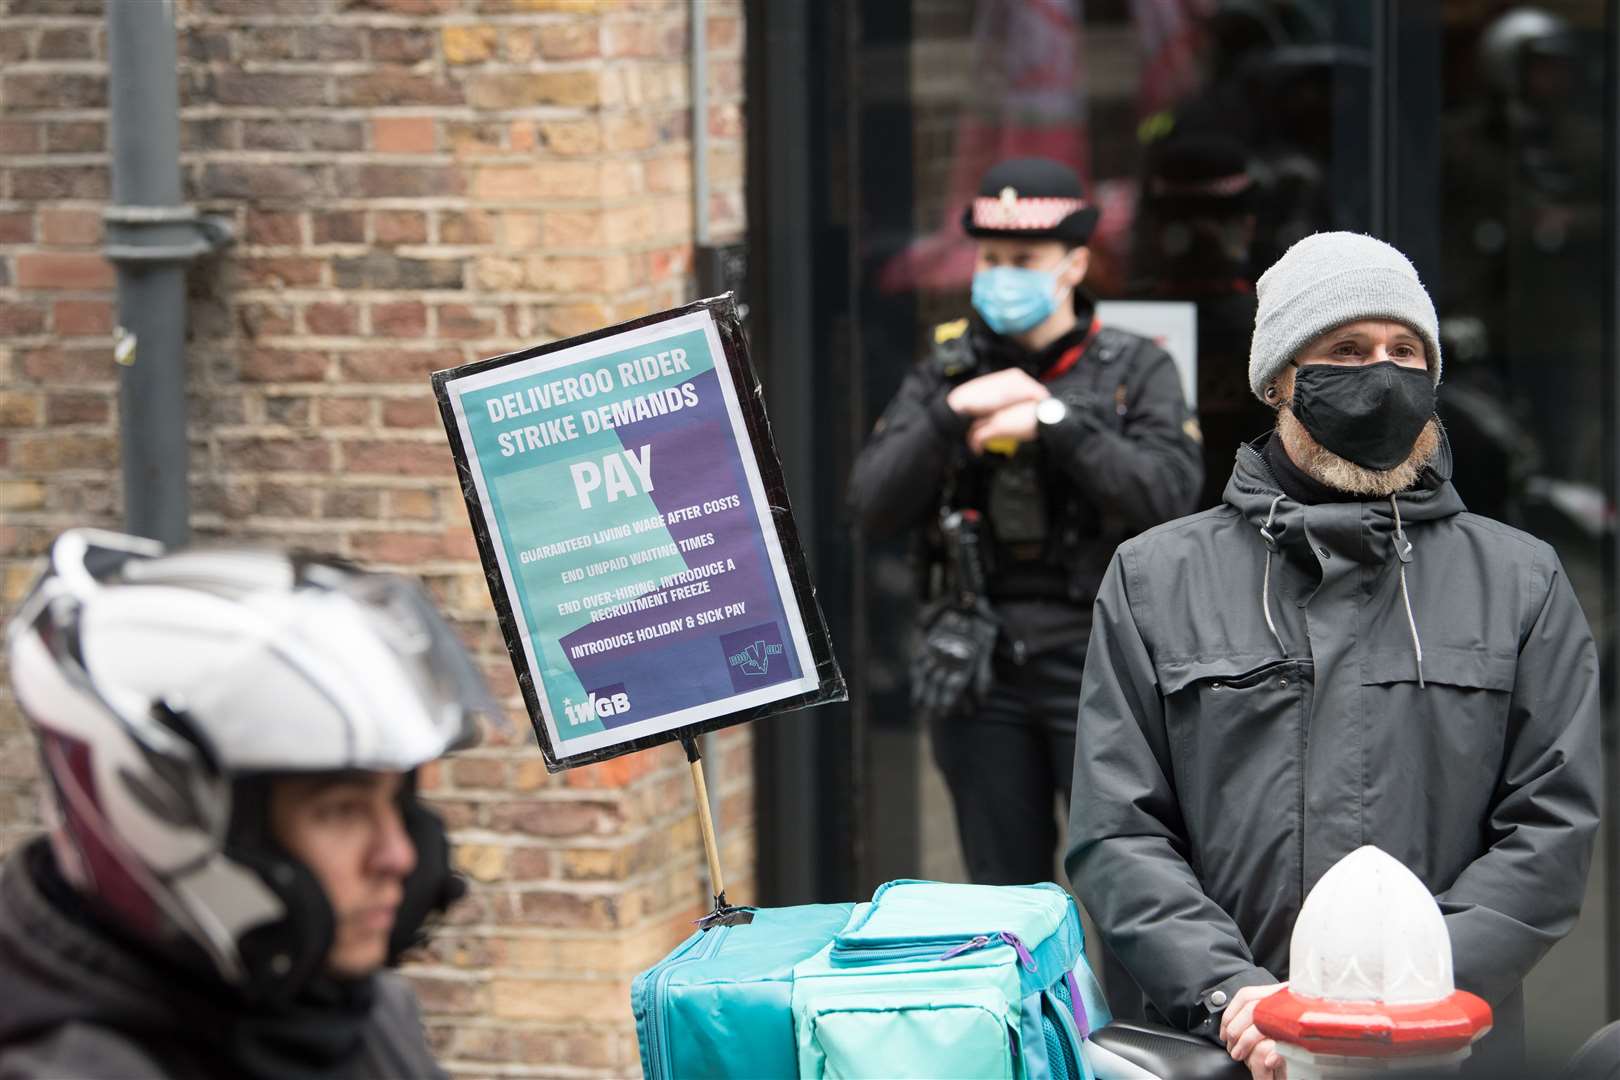 Deliveroo riders protest in a campaign for fair pay, safety protections and basic workers’ rights (Stefan Rousseau/PA)